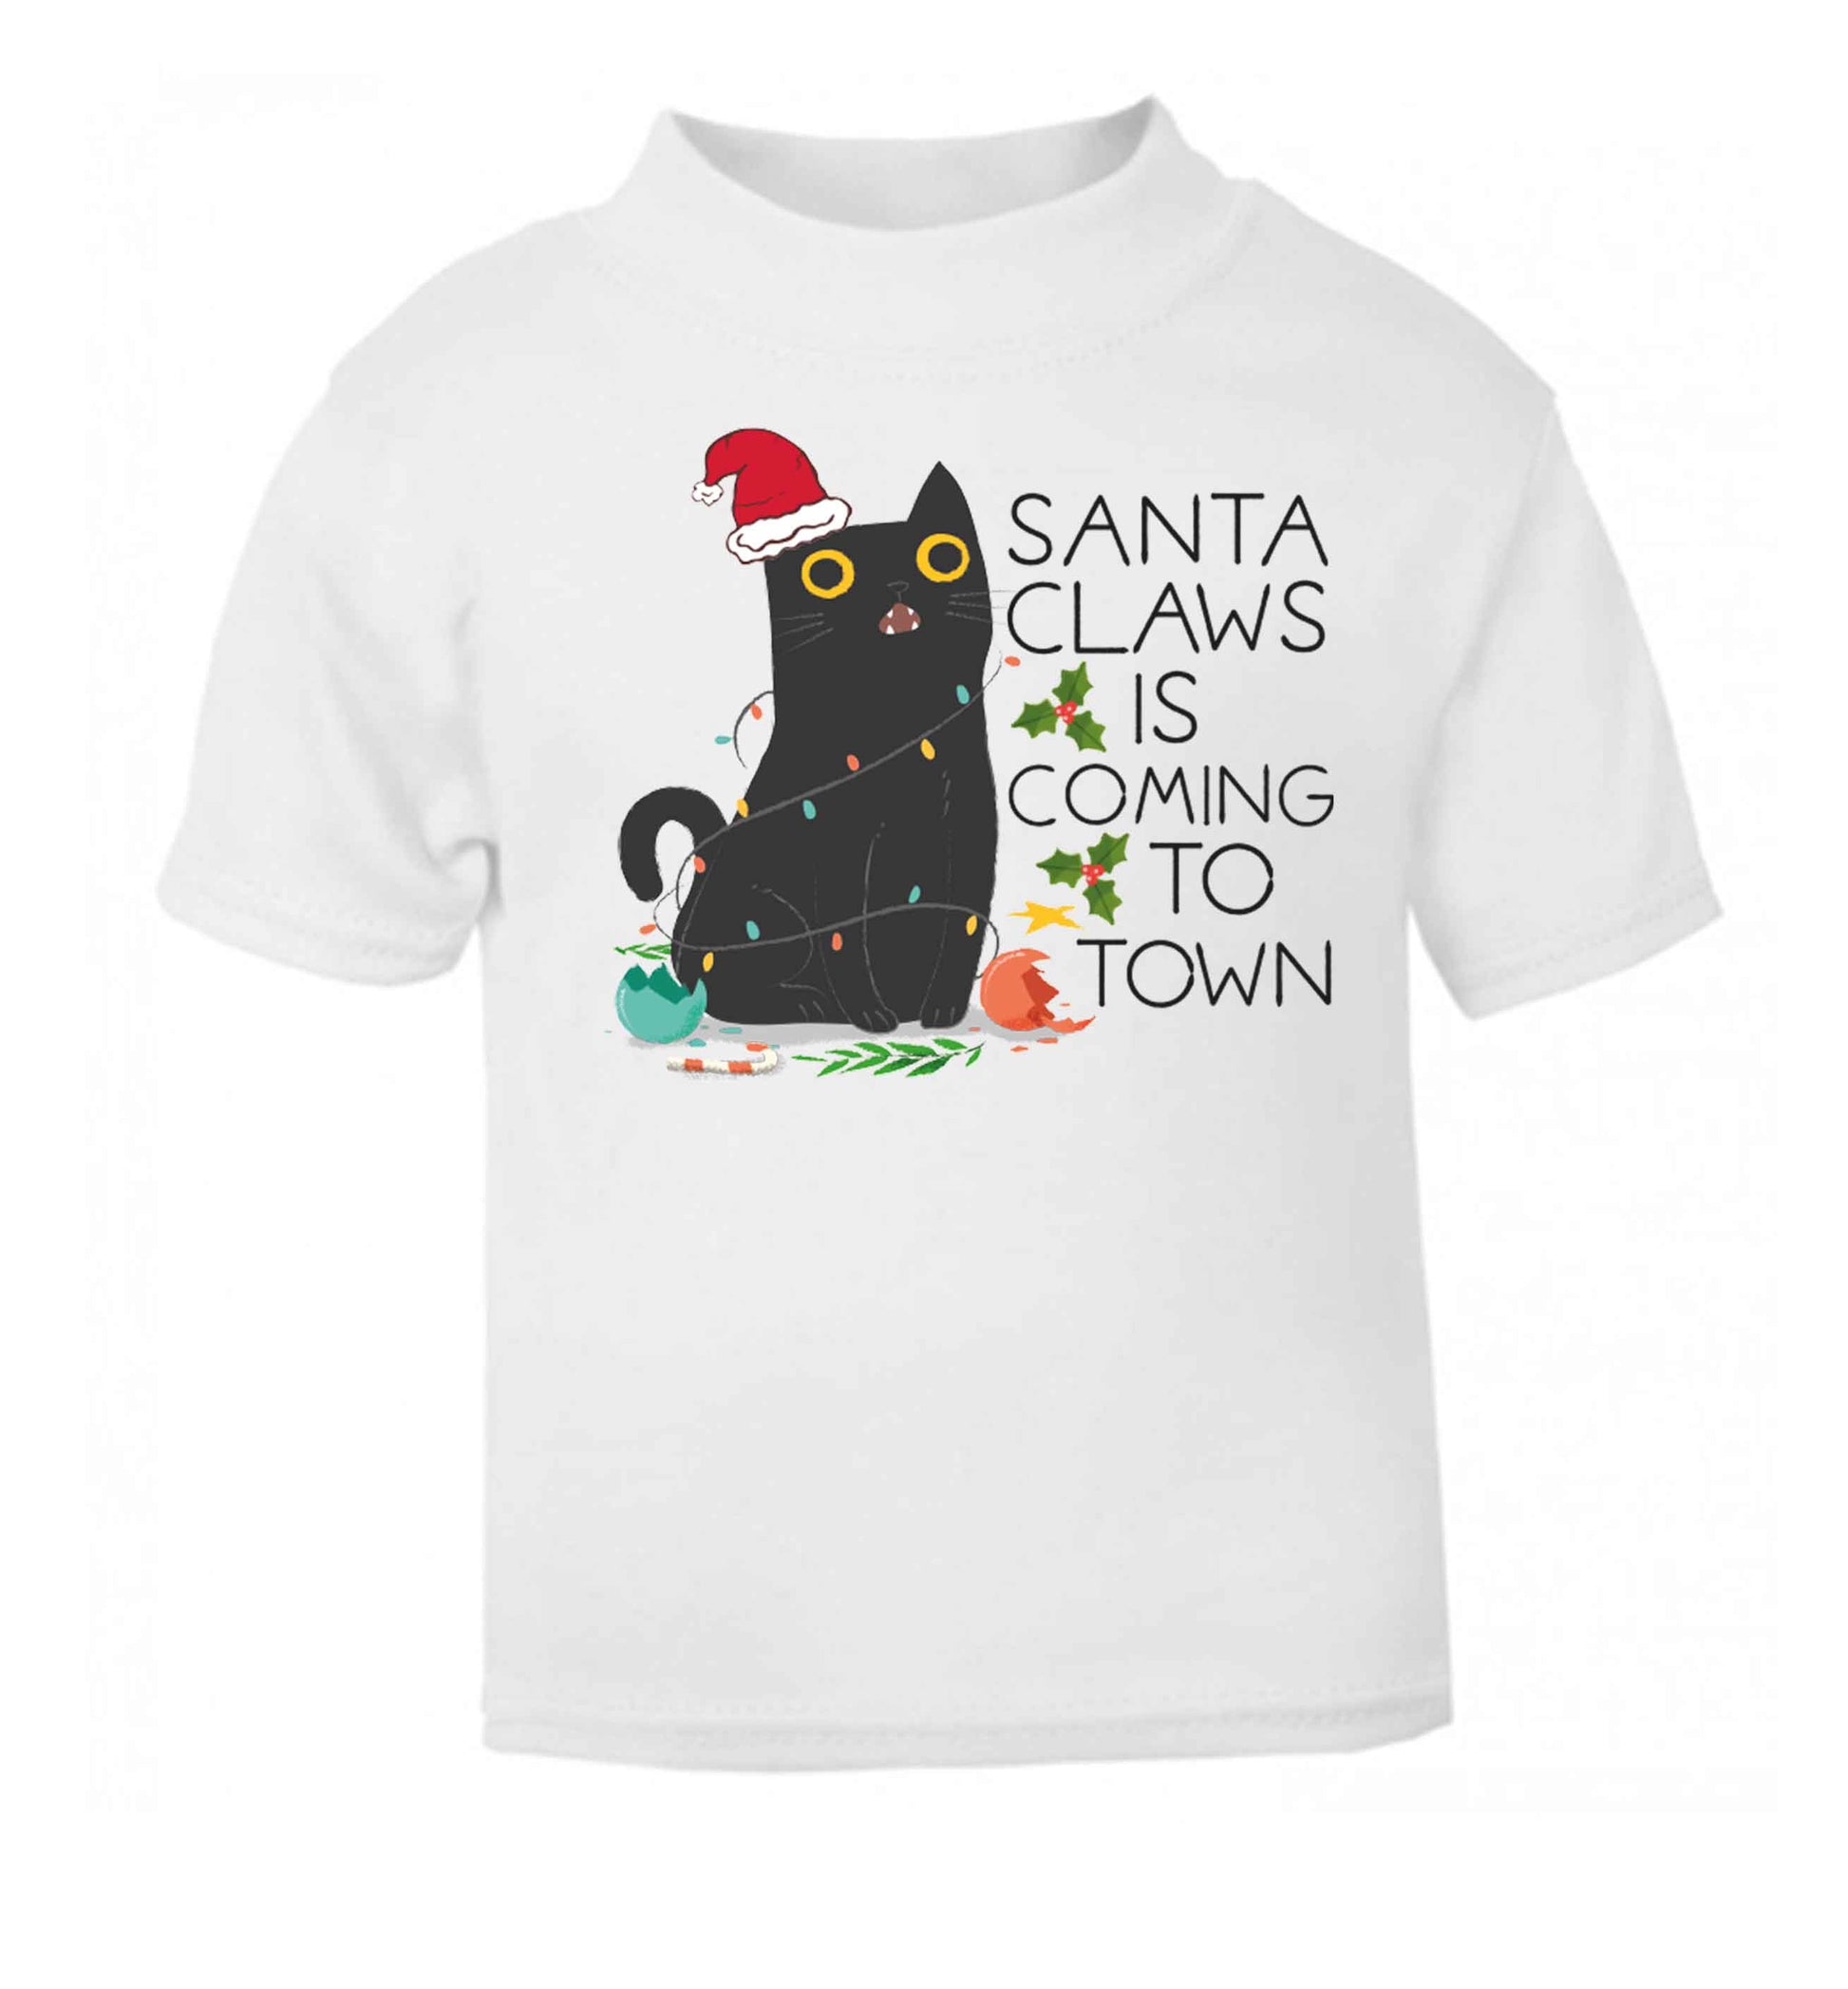 Santa claws is coming to town  baby toddler Tshirt 2 Years